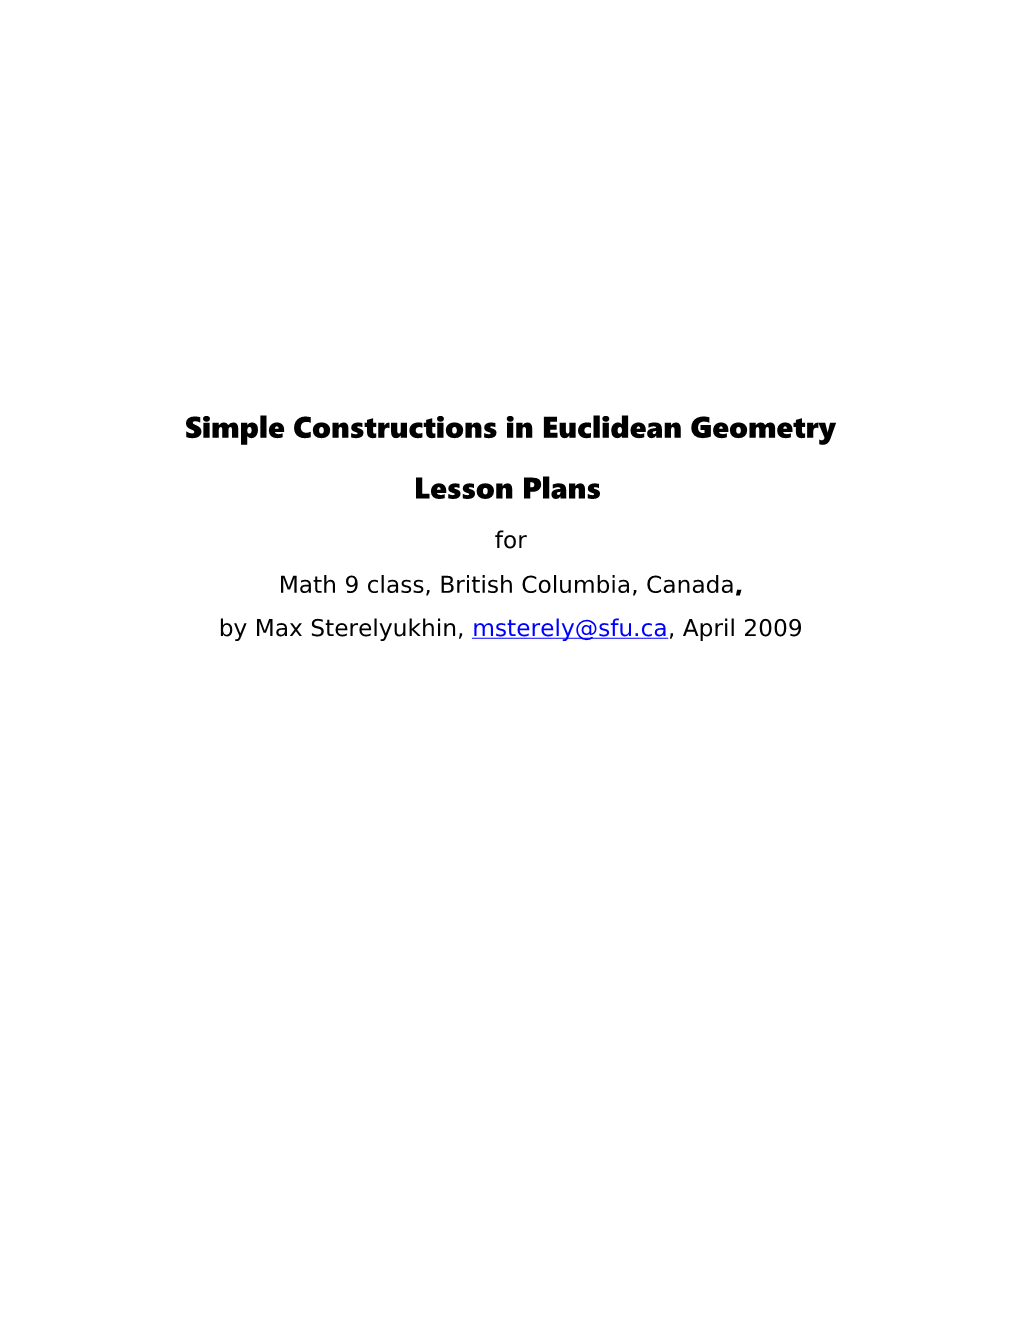 Simple Constructions in Euclidean Geometry Lesson Plans